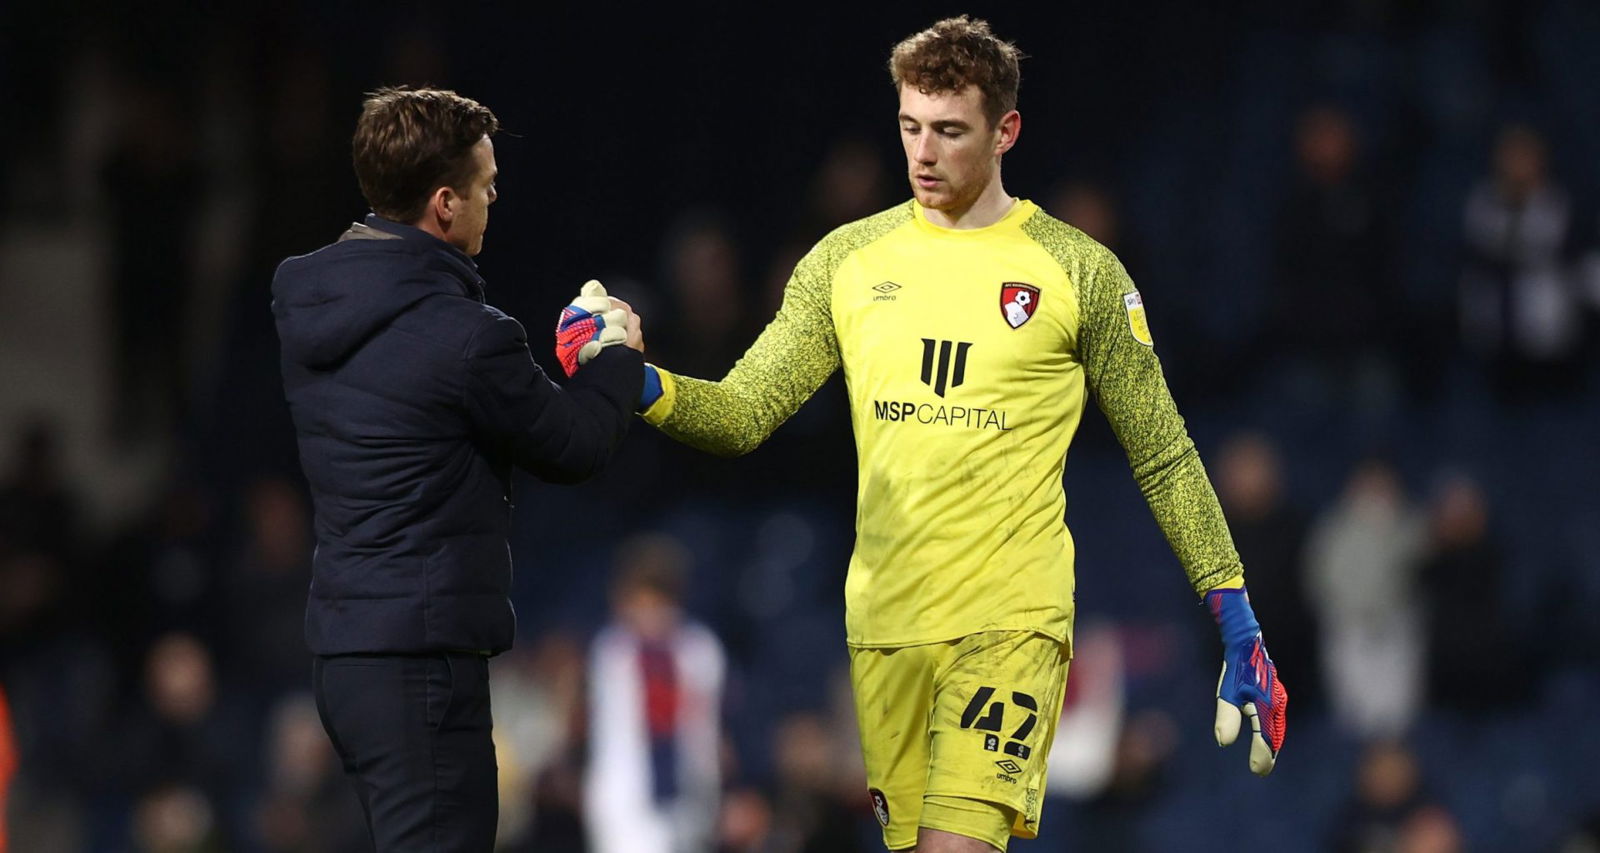 Bournemouth's Keeper Set for Millwall Loan